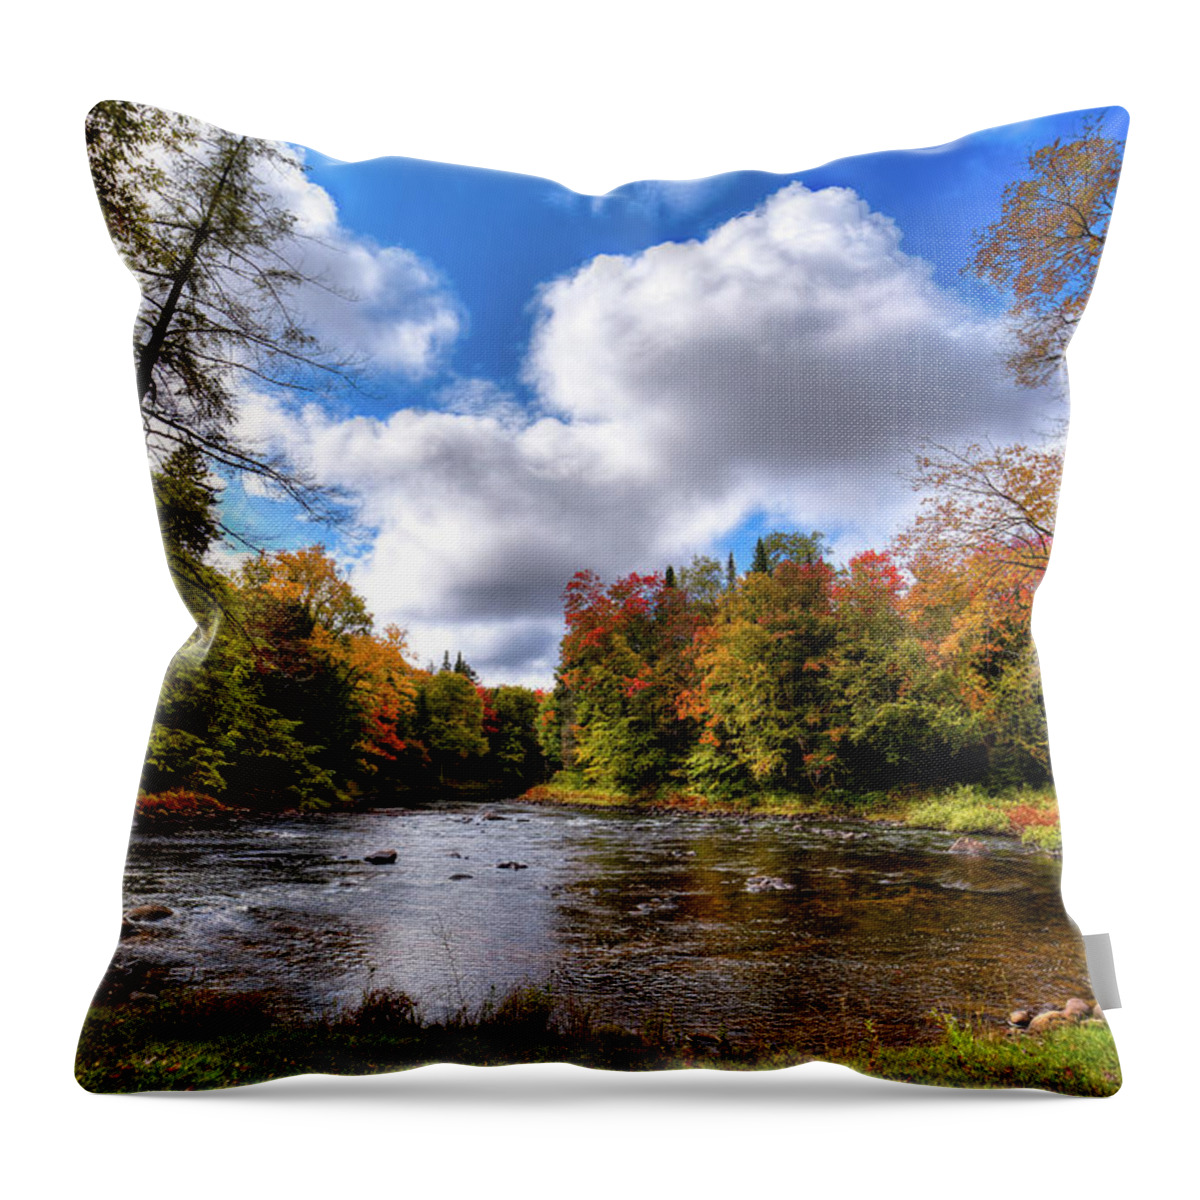 Landscapes Throw Pillow featuring the photograph Moose River near Scusa Road by David Patterson